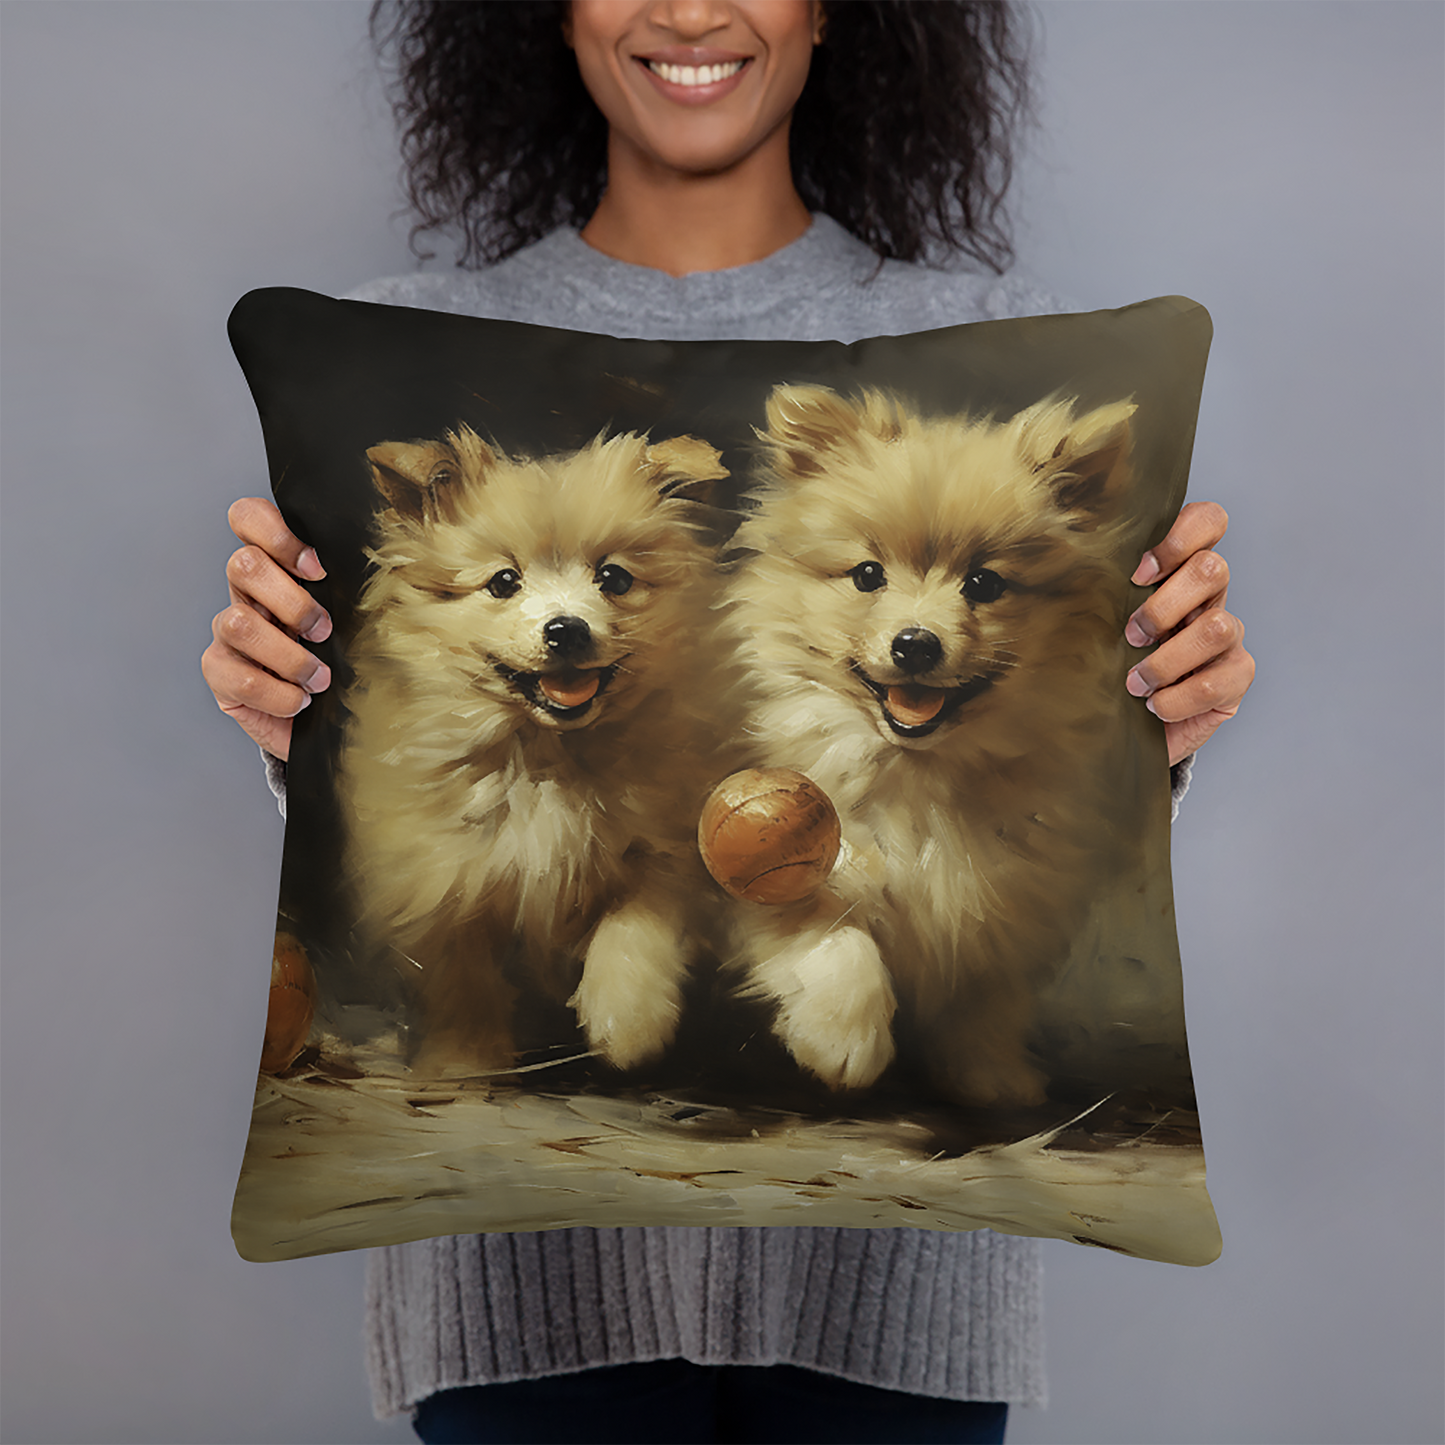 Dog Throw Pillow Playful Puppies Chase Ball Polyester Decorative Cushion 18x18